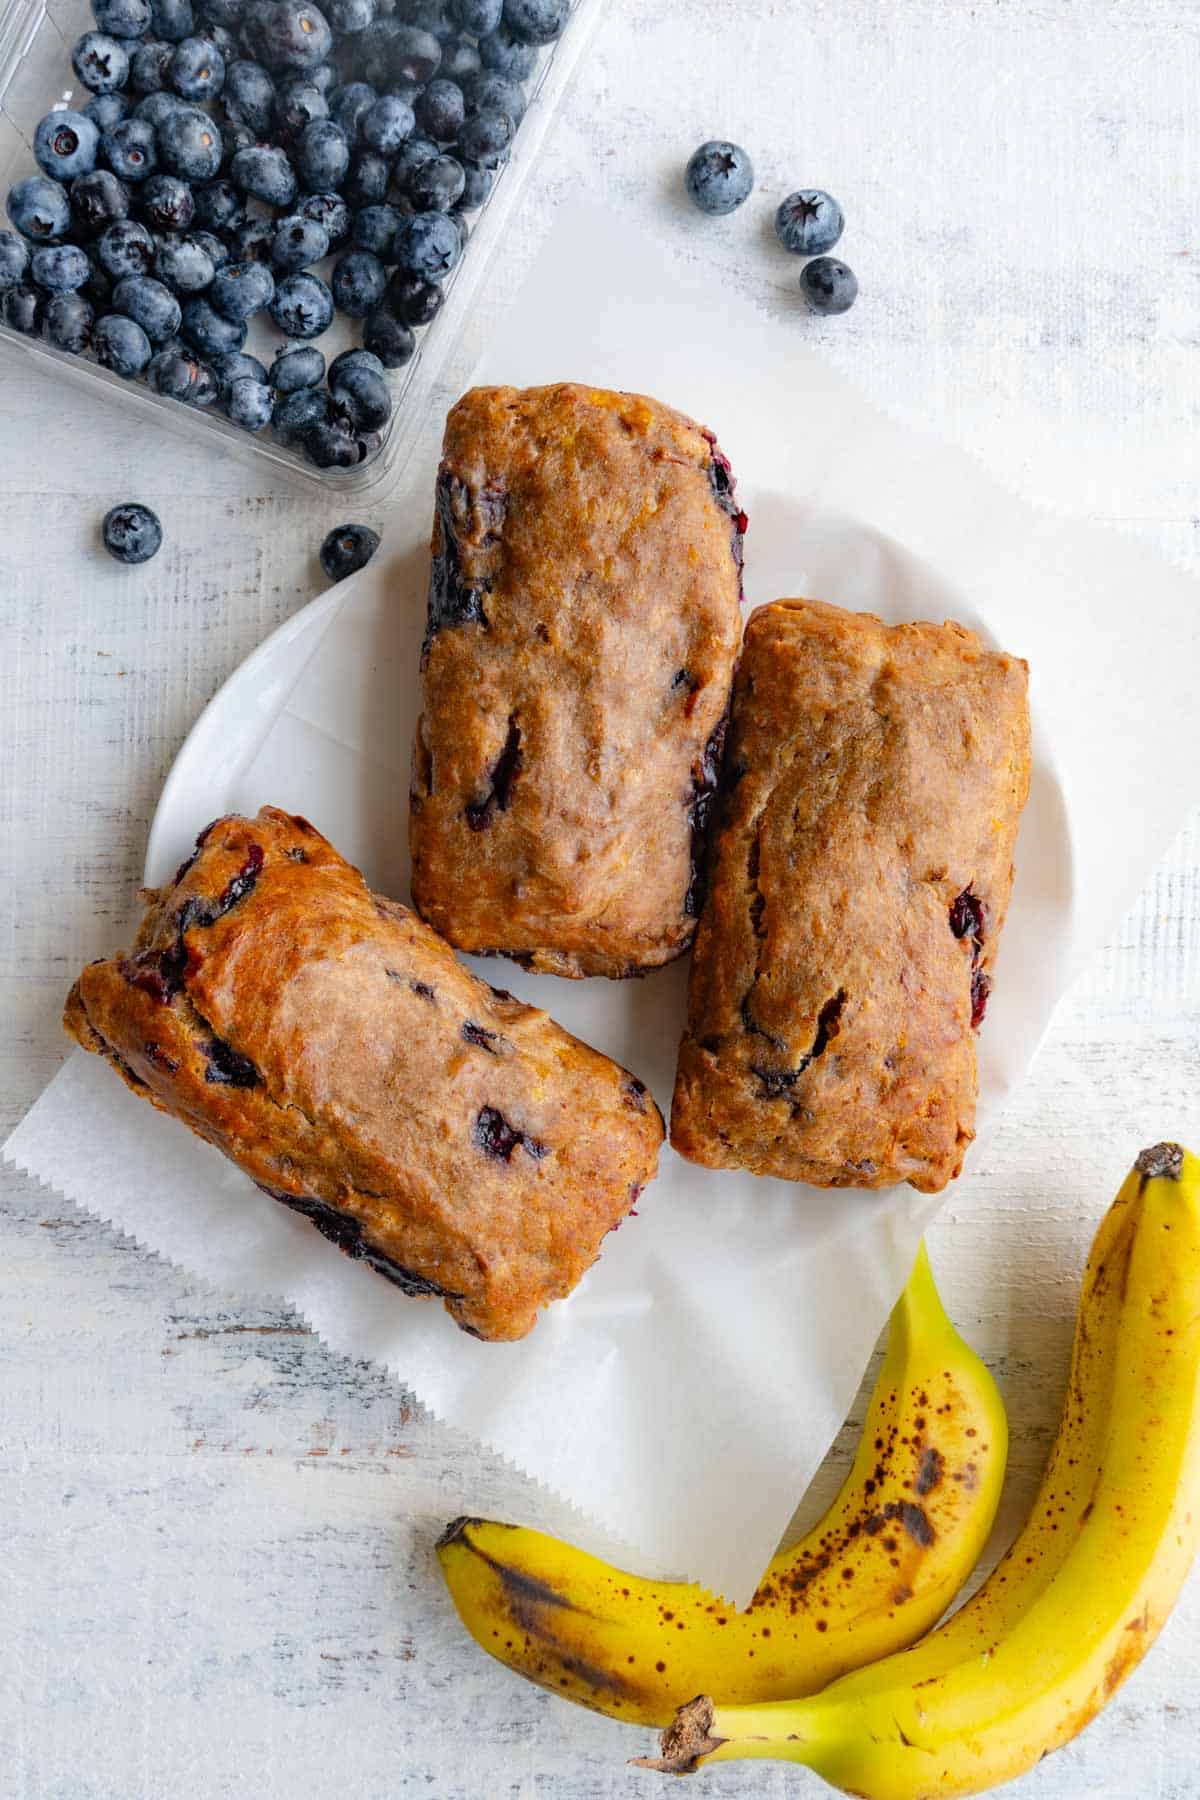 Three gluten-free vegan banana bread mini loaves on white parchment paper beside a box of blueberries and two bananas.